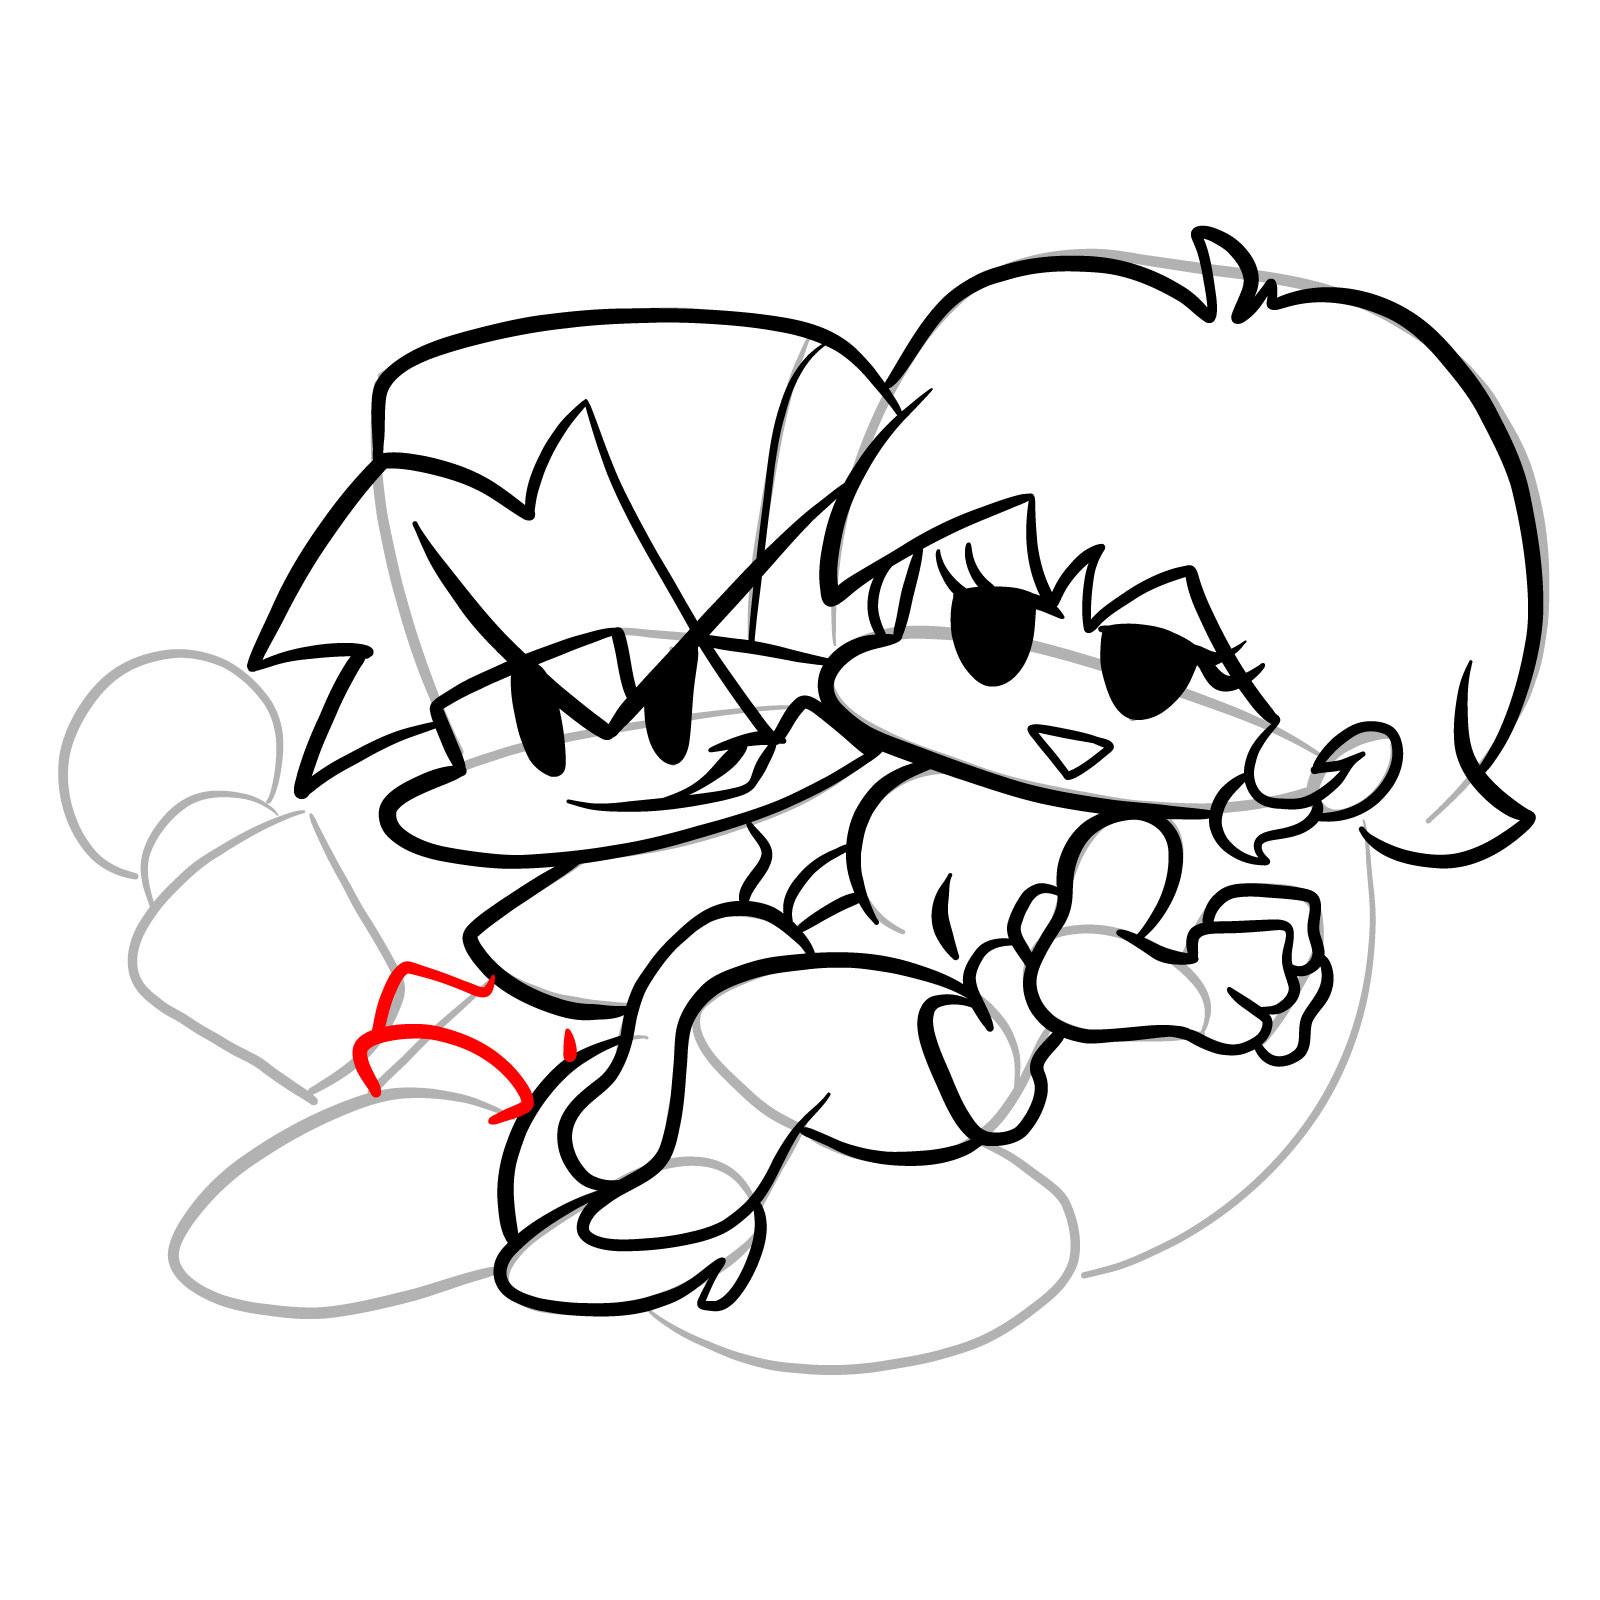 How to draw Bf holding Gf (week 7) - step 24